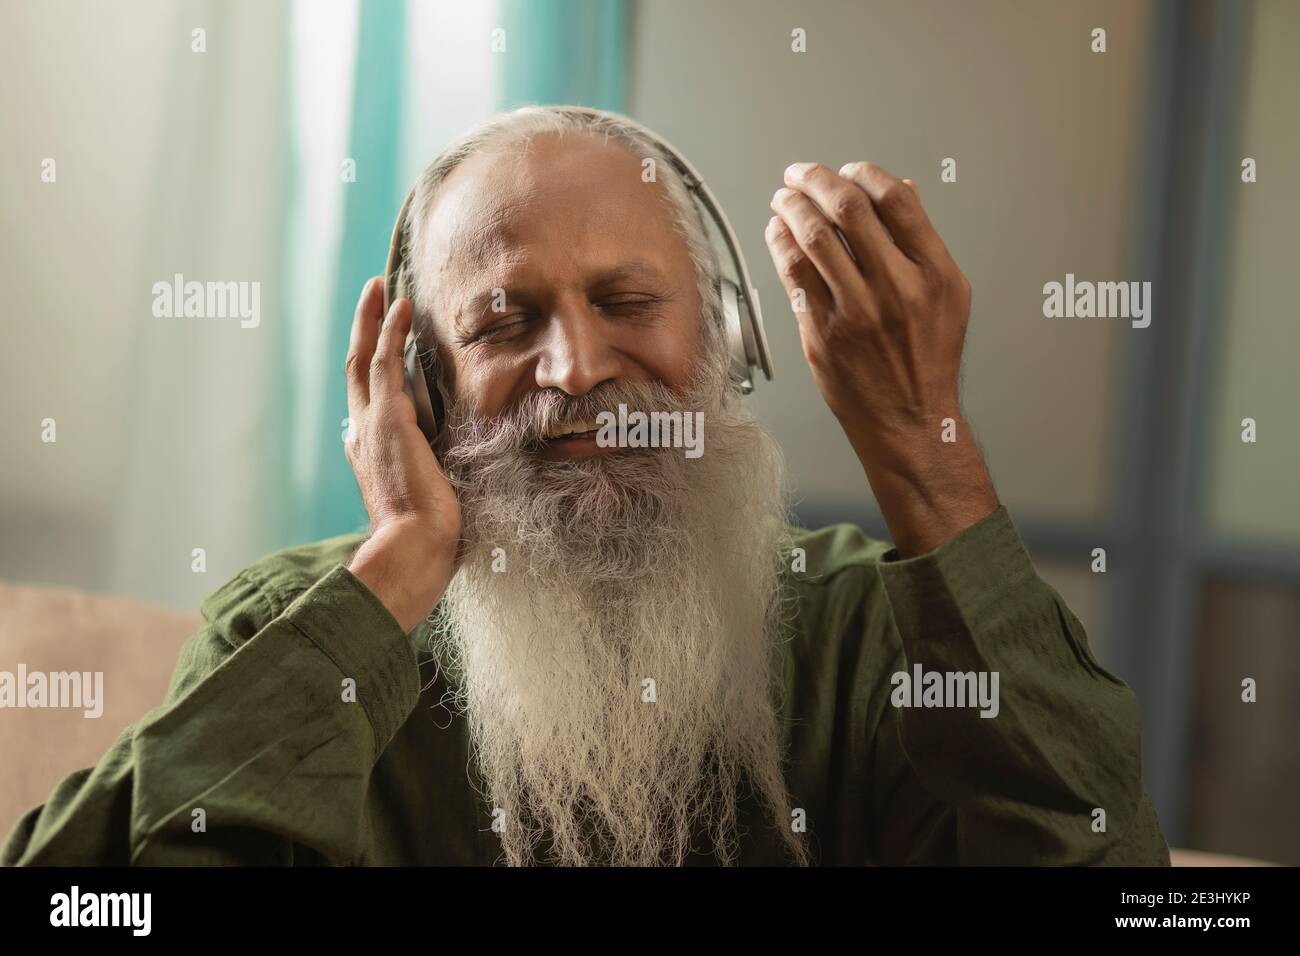 A HAPPY BEARDED MAN SINGING ALONG WHILE LISTENING TO MUSIC Stock Photo